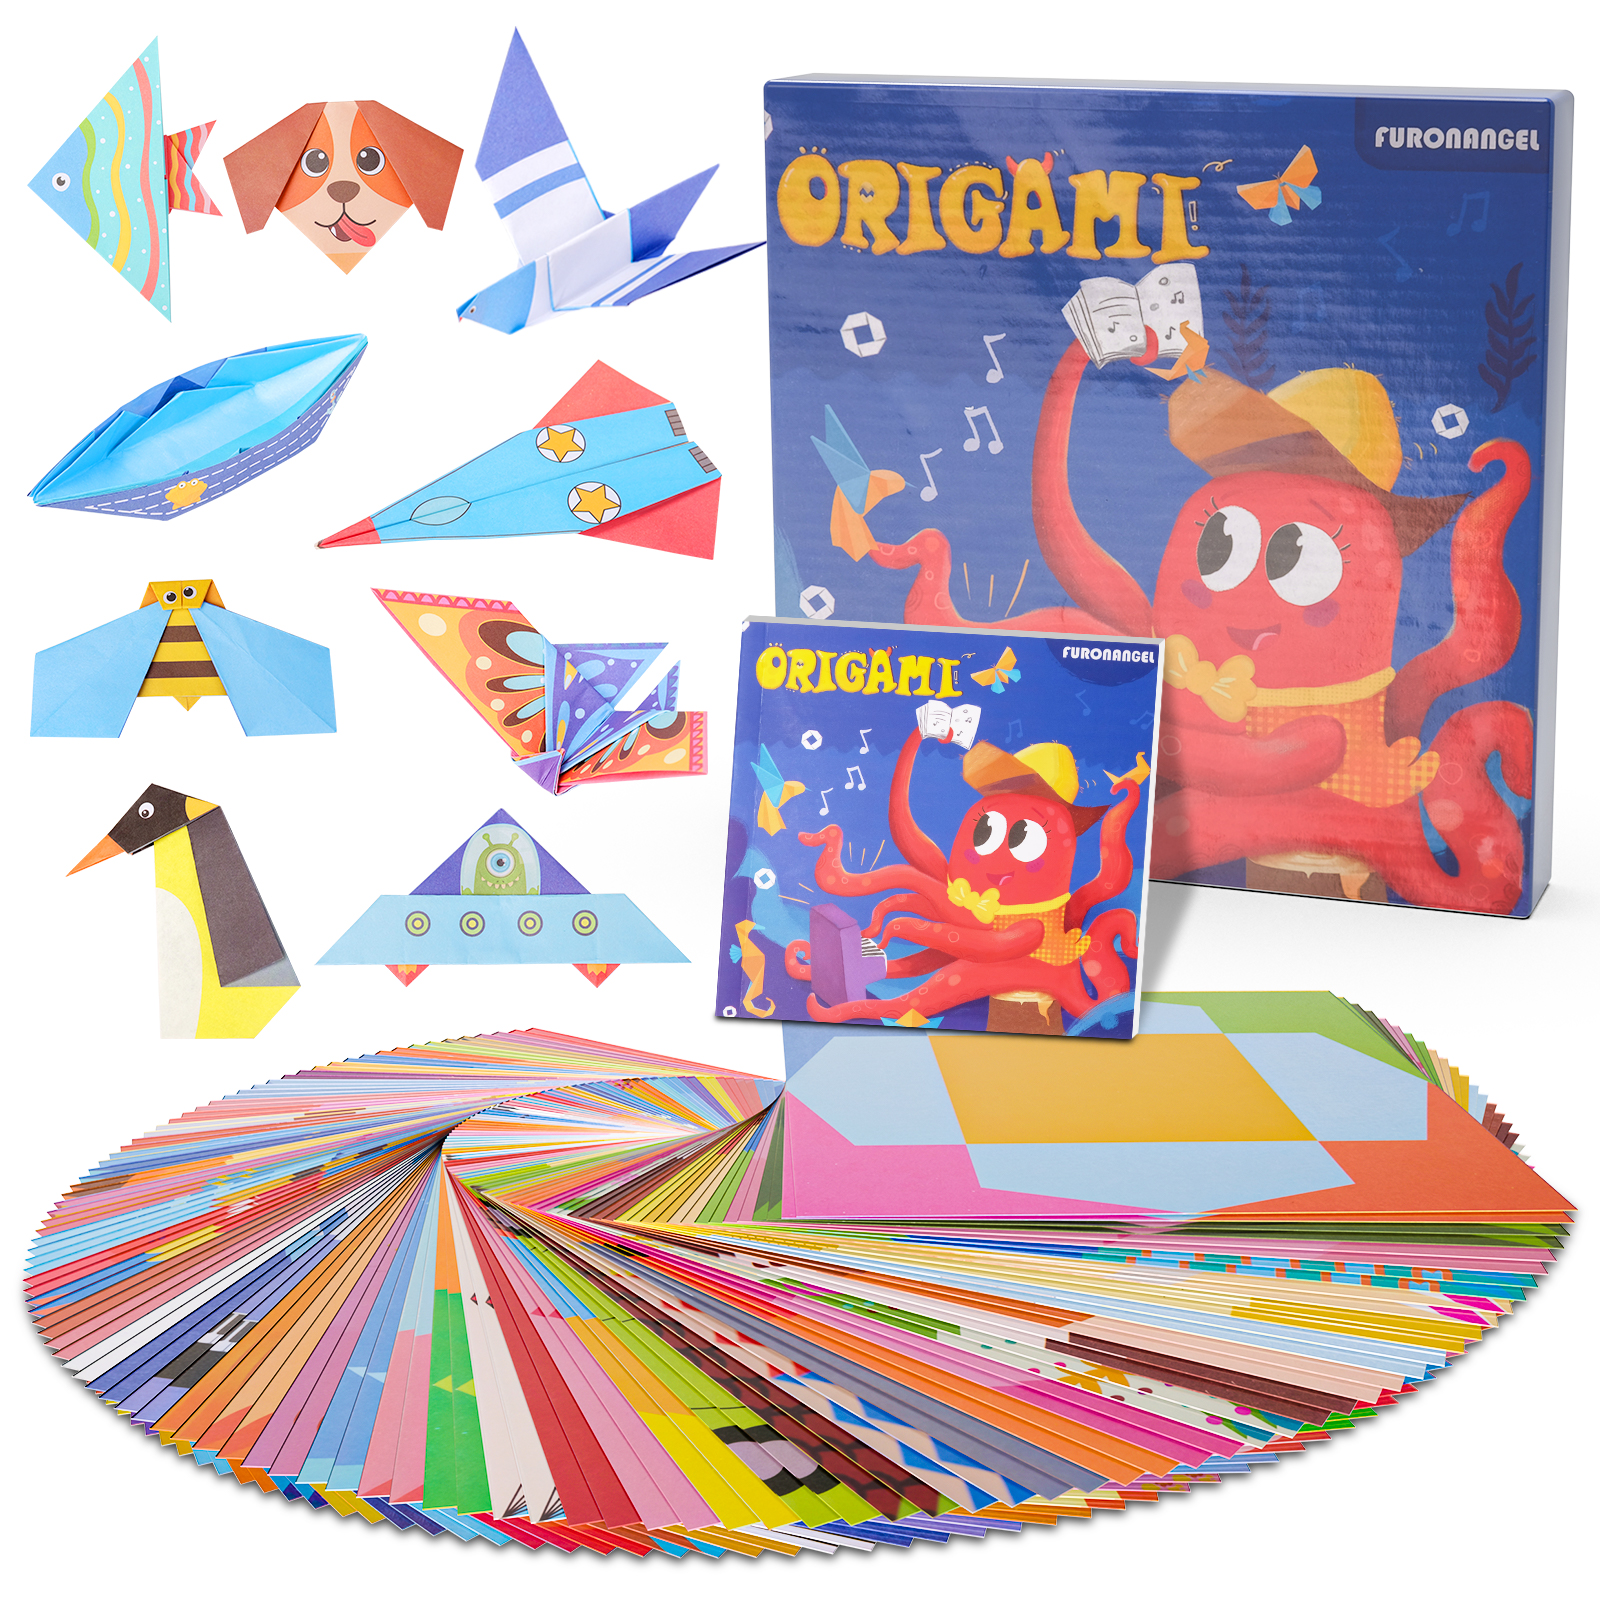 Gifts for 7 8 9 10 11 12 Year Old Girls Boys Toy, Origami Arts and Crafts for Kids Age 6-12 Years Old Girls Boys Children Gift, Origami Paper Craft Kits for Kid Girl Aged 8-12 Year olds Girl Presents - image 1 of 7